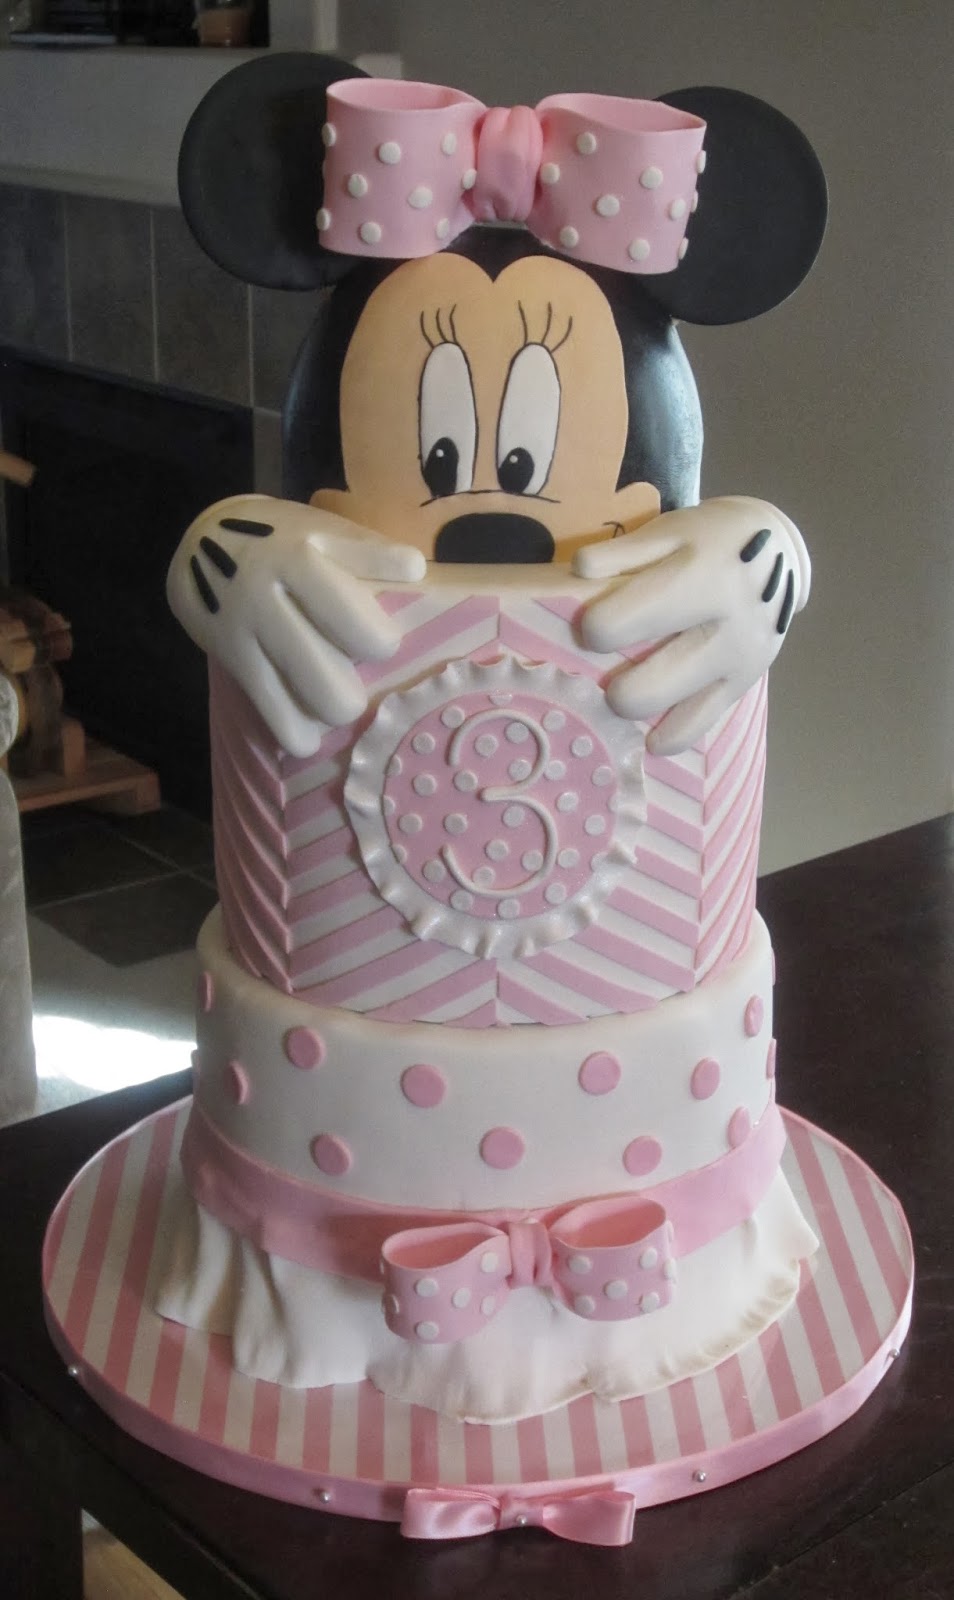 mickey-mouse-birthday-party-2-year-old-birthday-cake-cakes-female